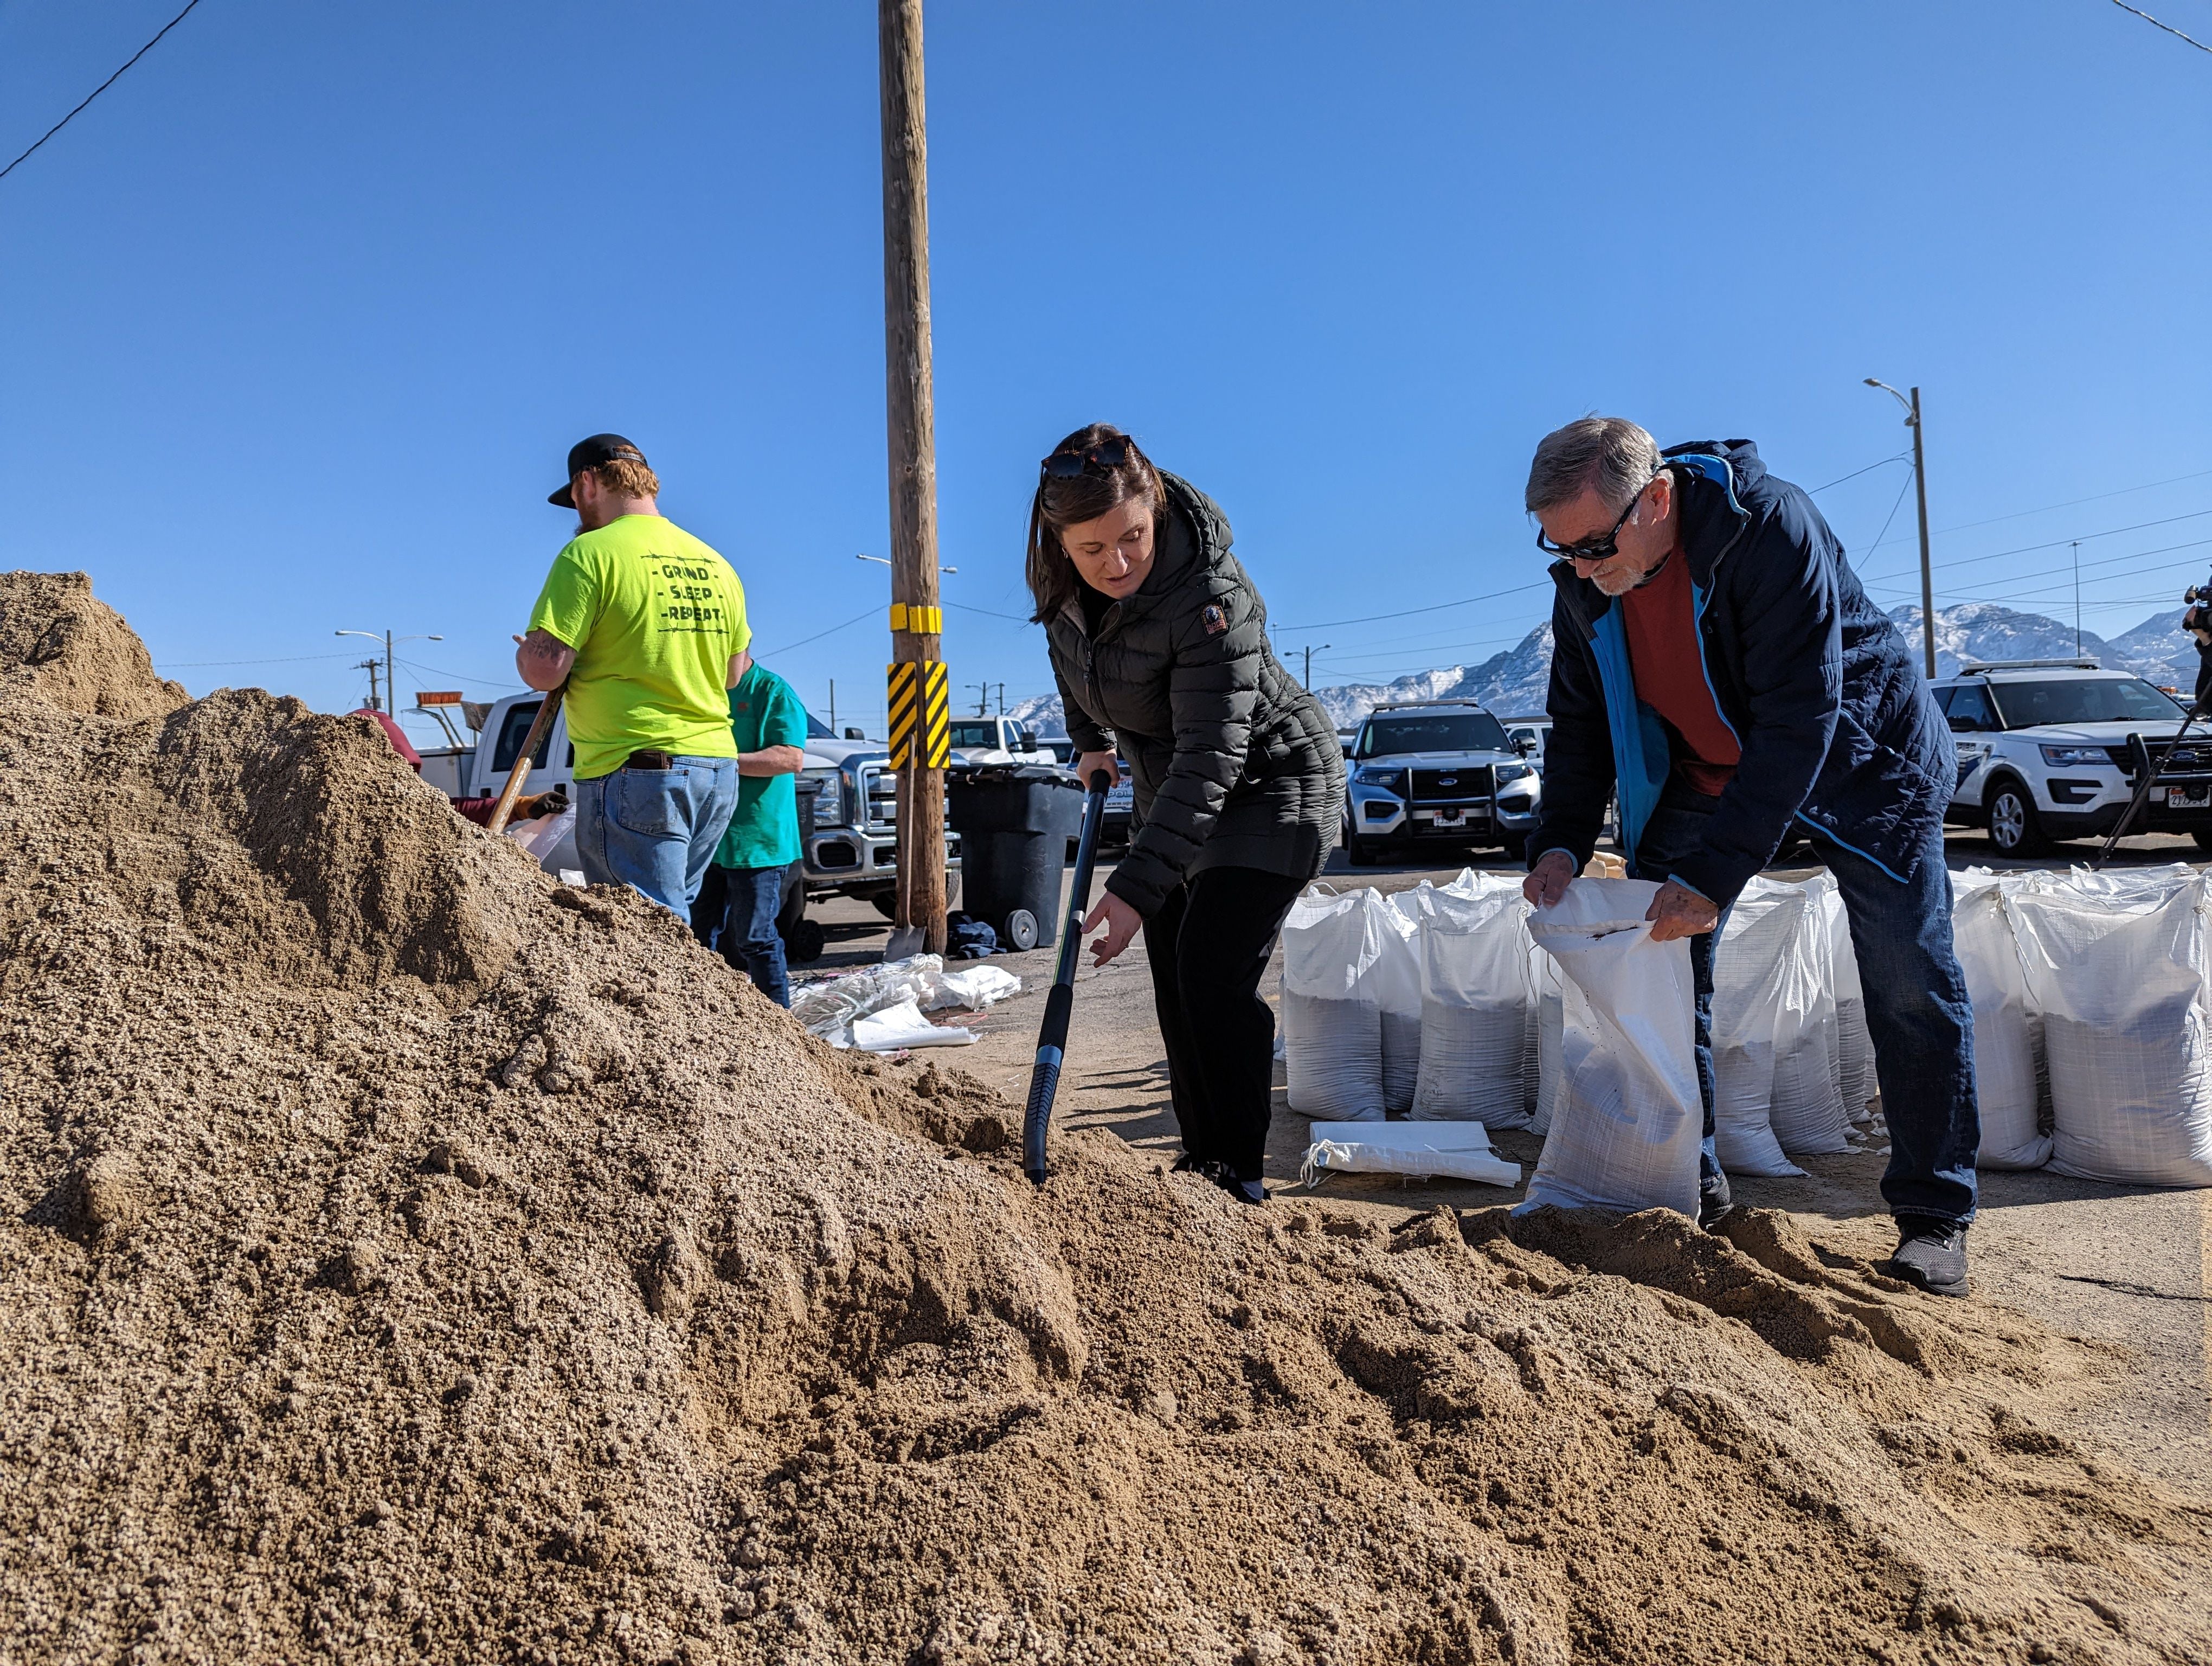 (Blake Apgar | The Salt Lake Tribune) Salt Lake County Mayor Jenny Wilson fills sandbags with her father, former Salt Lake City Mayor Ted Wilson, in Midvale on Friday, March 17, 2023. The county is preparing for potential flooding during runoff season in the Wasatch Mountains.